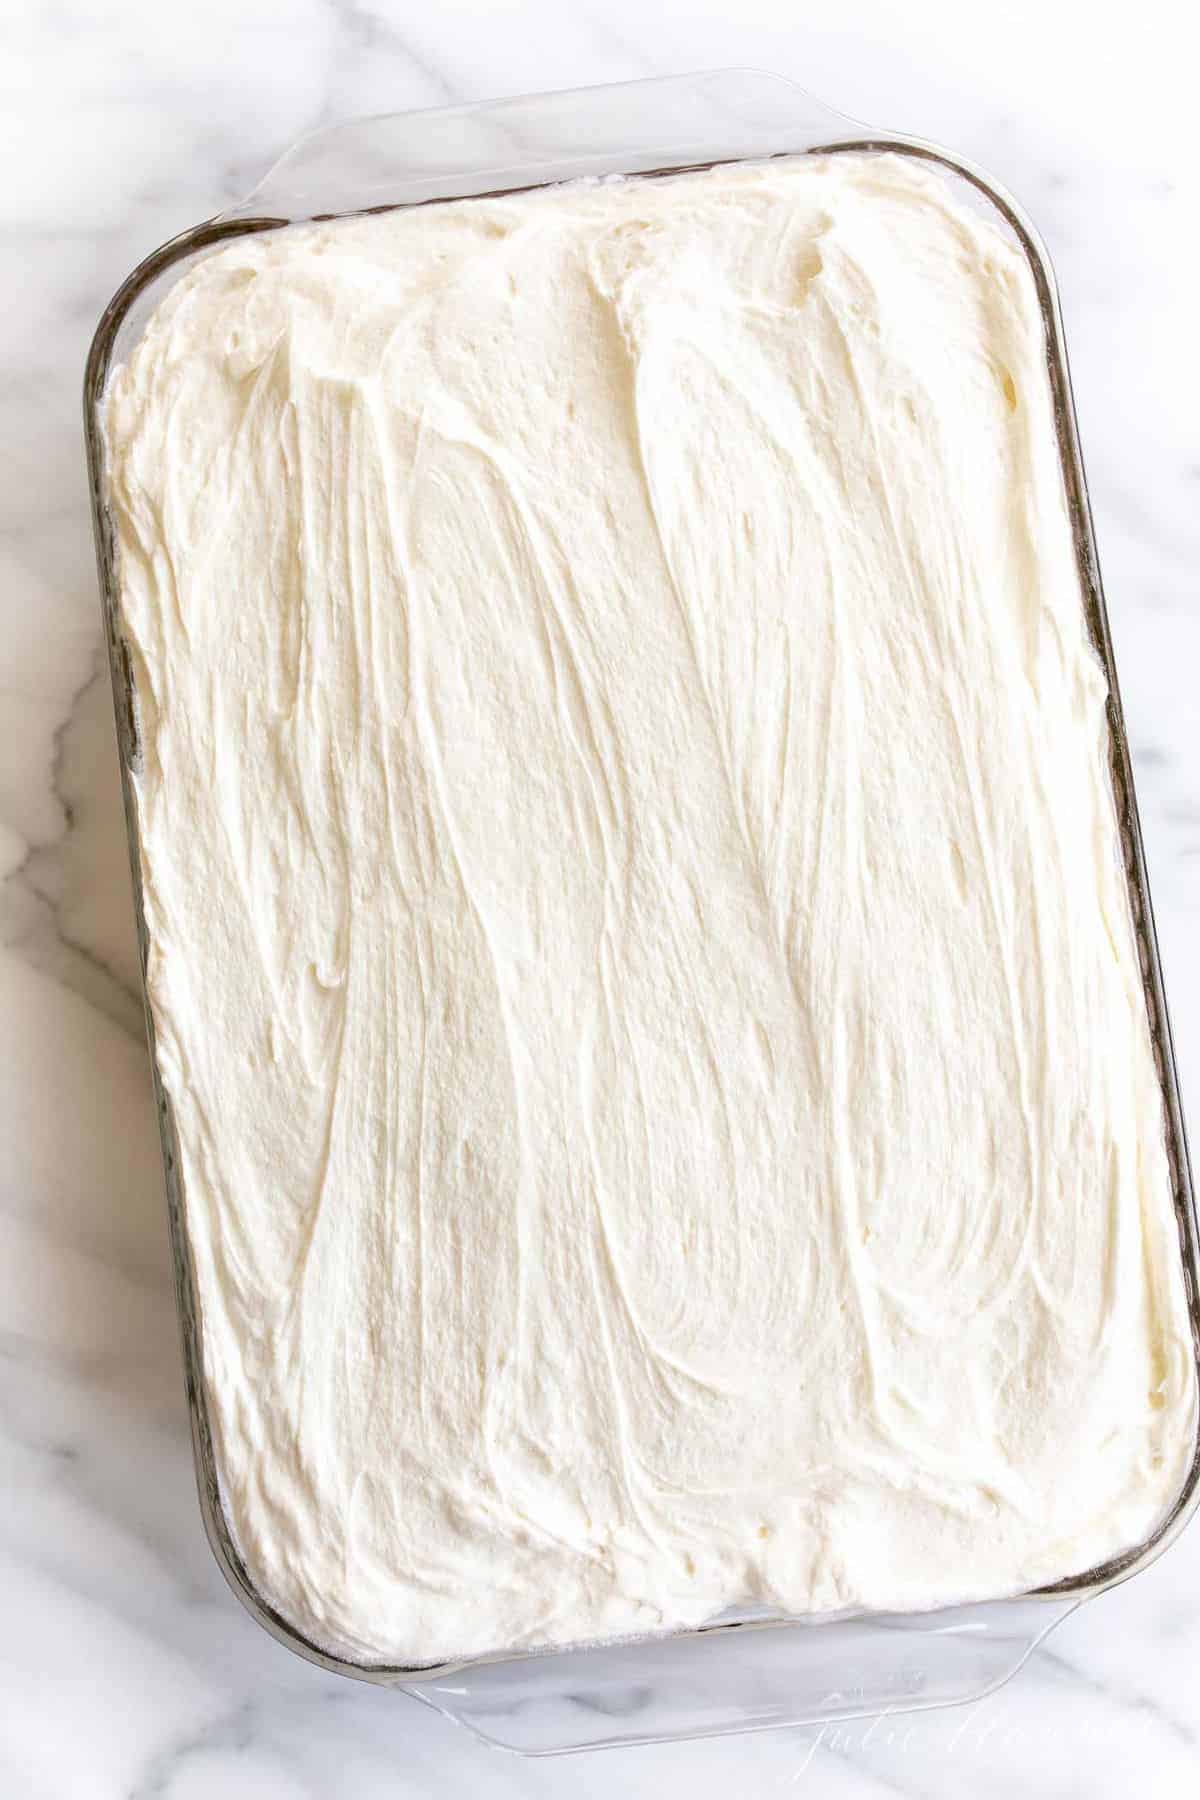 A cake frosted with cream cheese frosting in a glass dish, on a marble surface. 